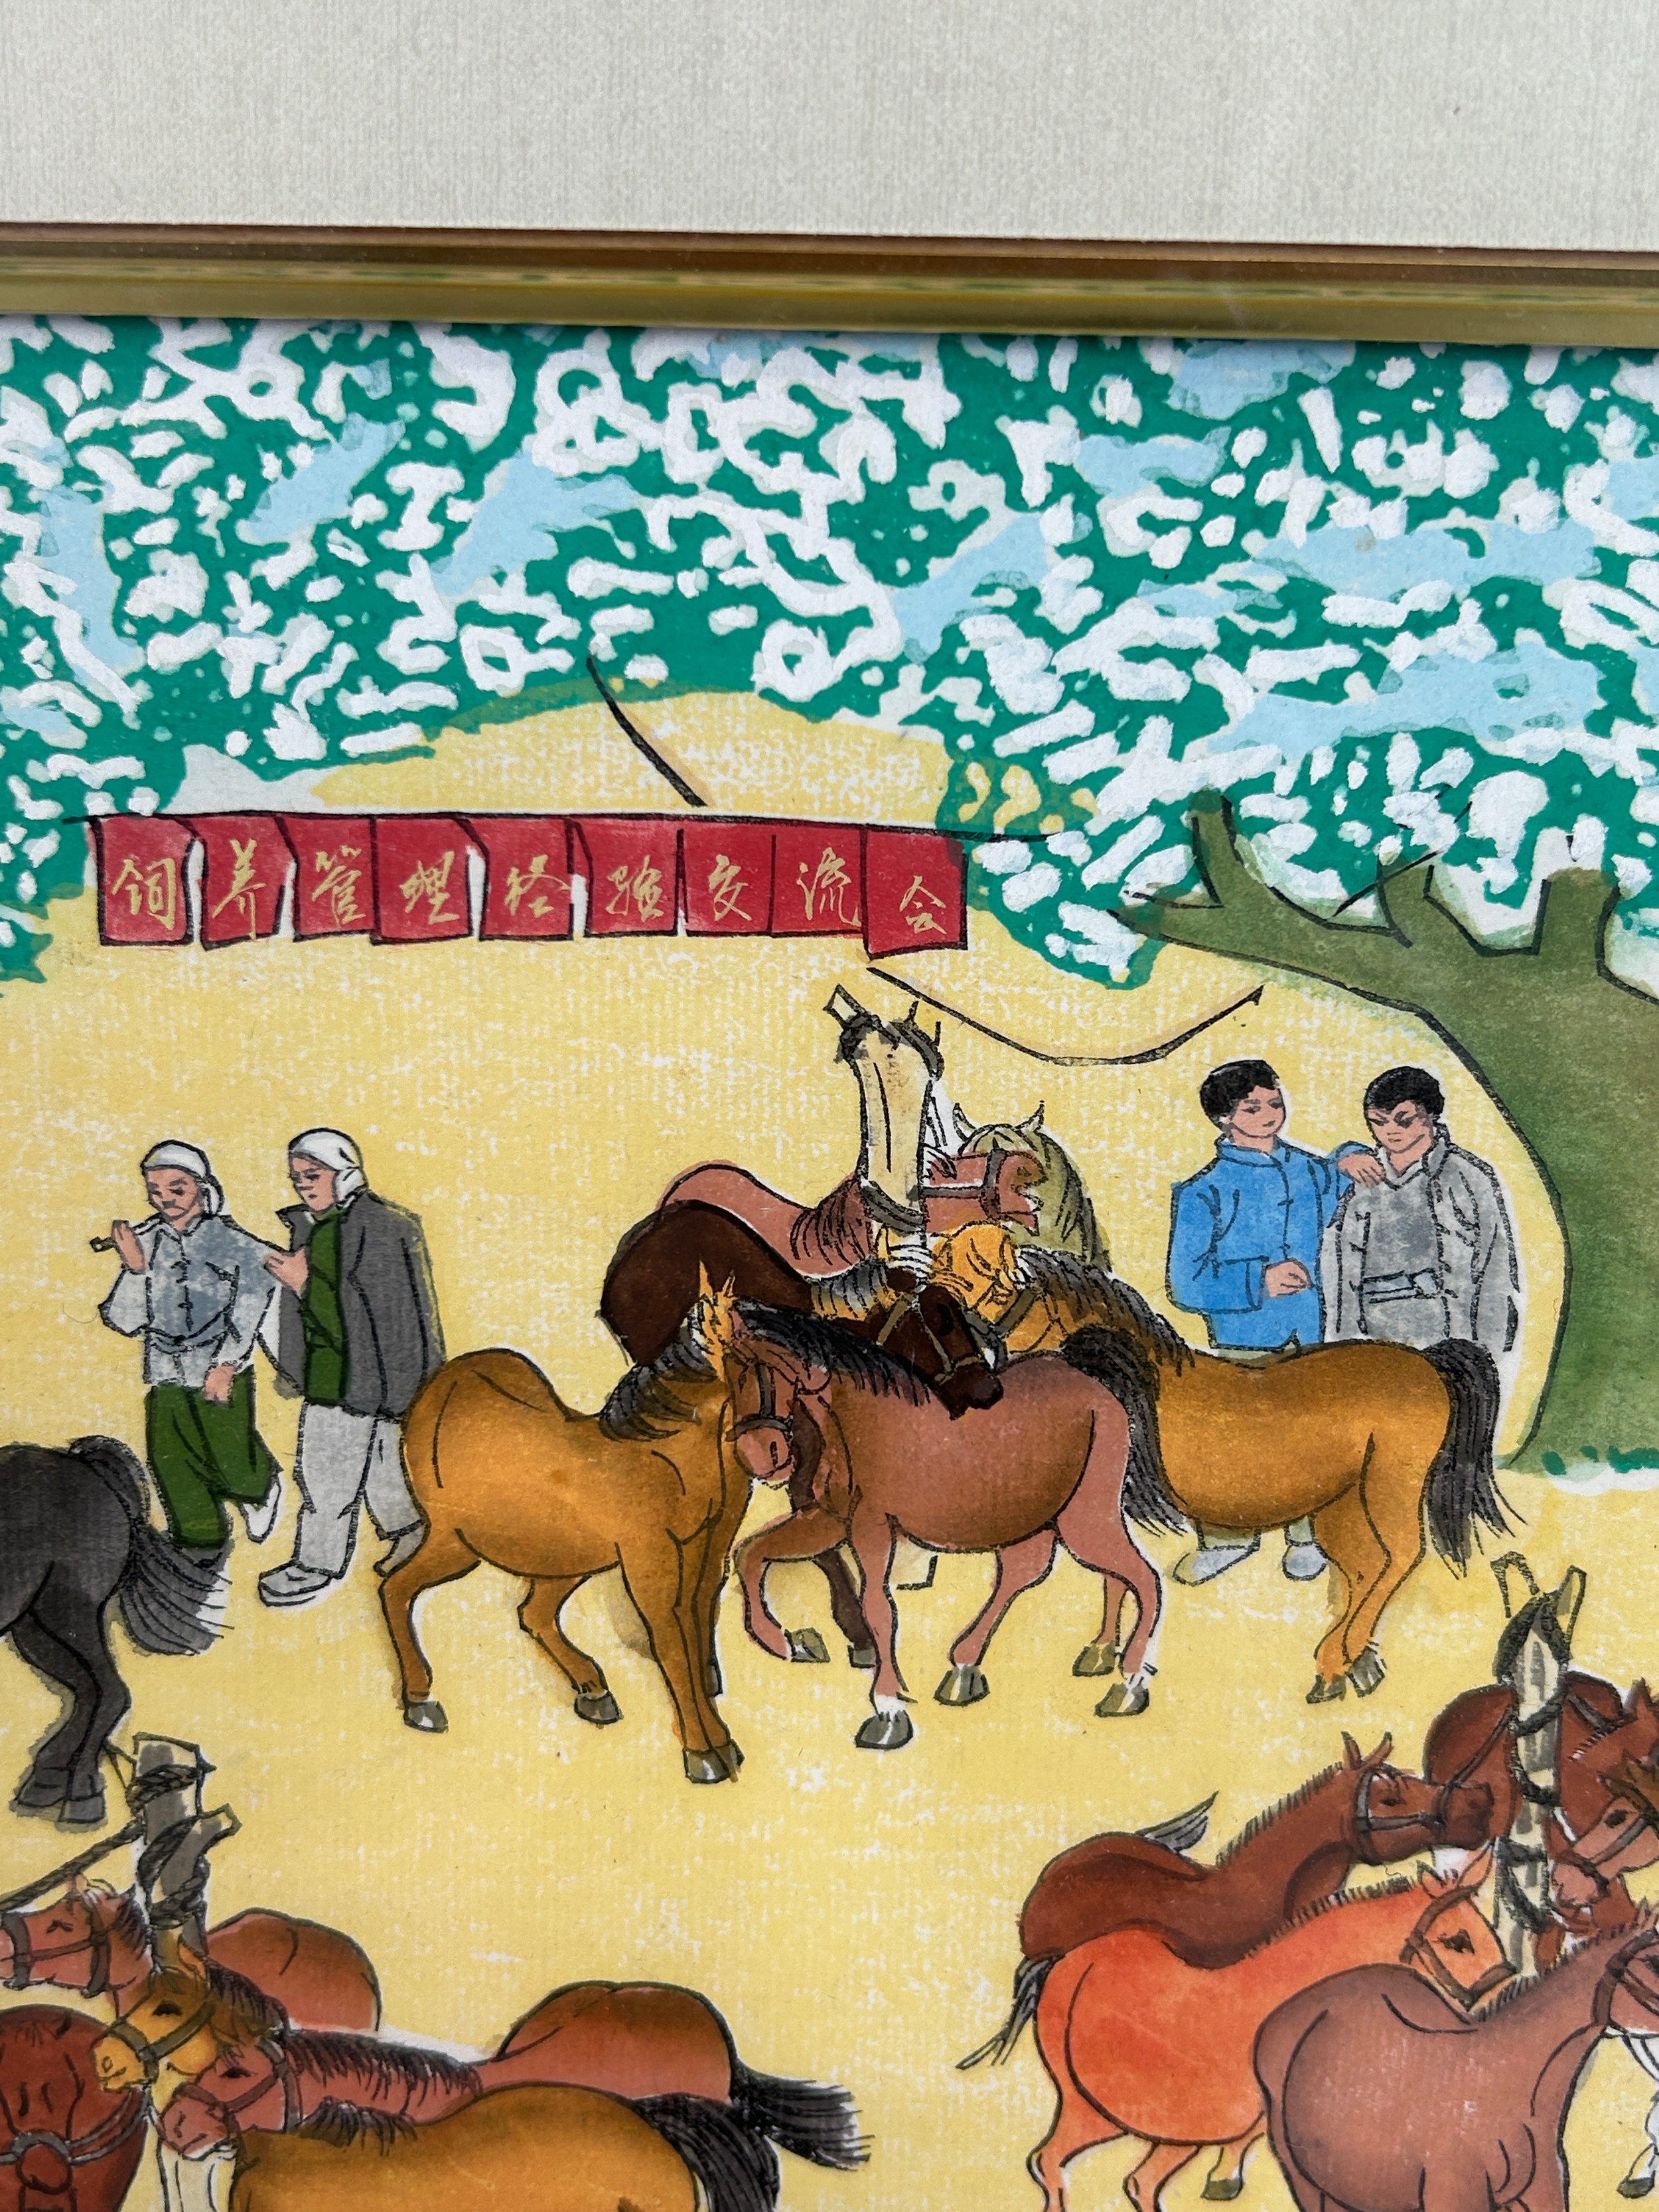 A WATERCOLOUR PAINTING ON PAPER DEPICTING A MONGOLIAN SCENE WITH HORSES, 50cm x 33cm Mounted in a - Image 3 of 6